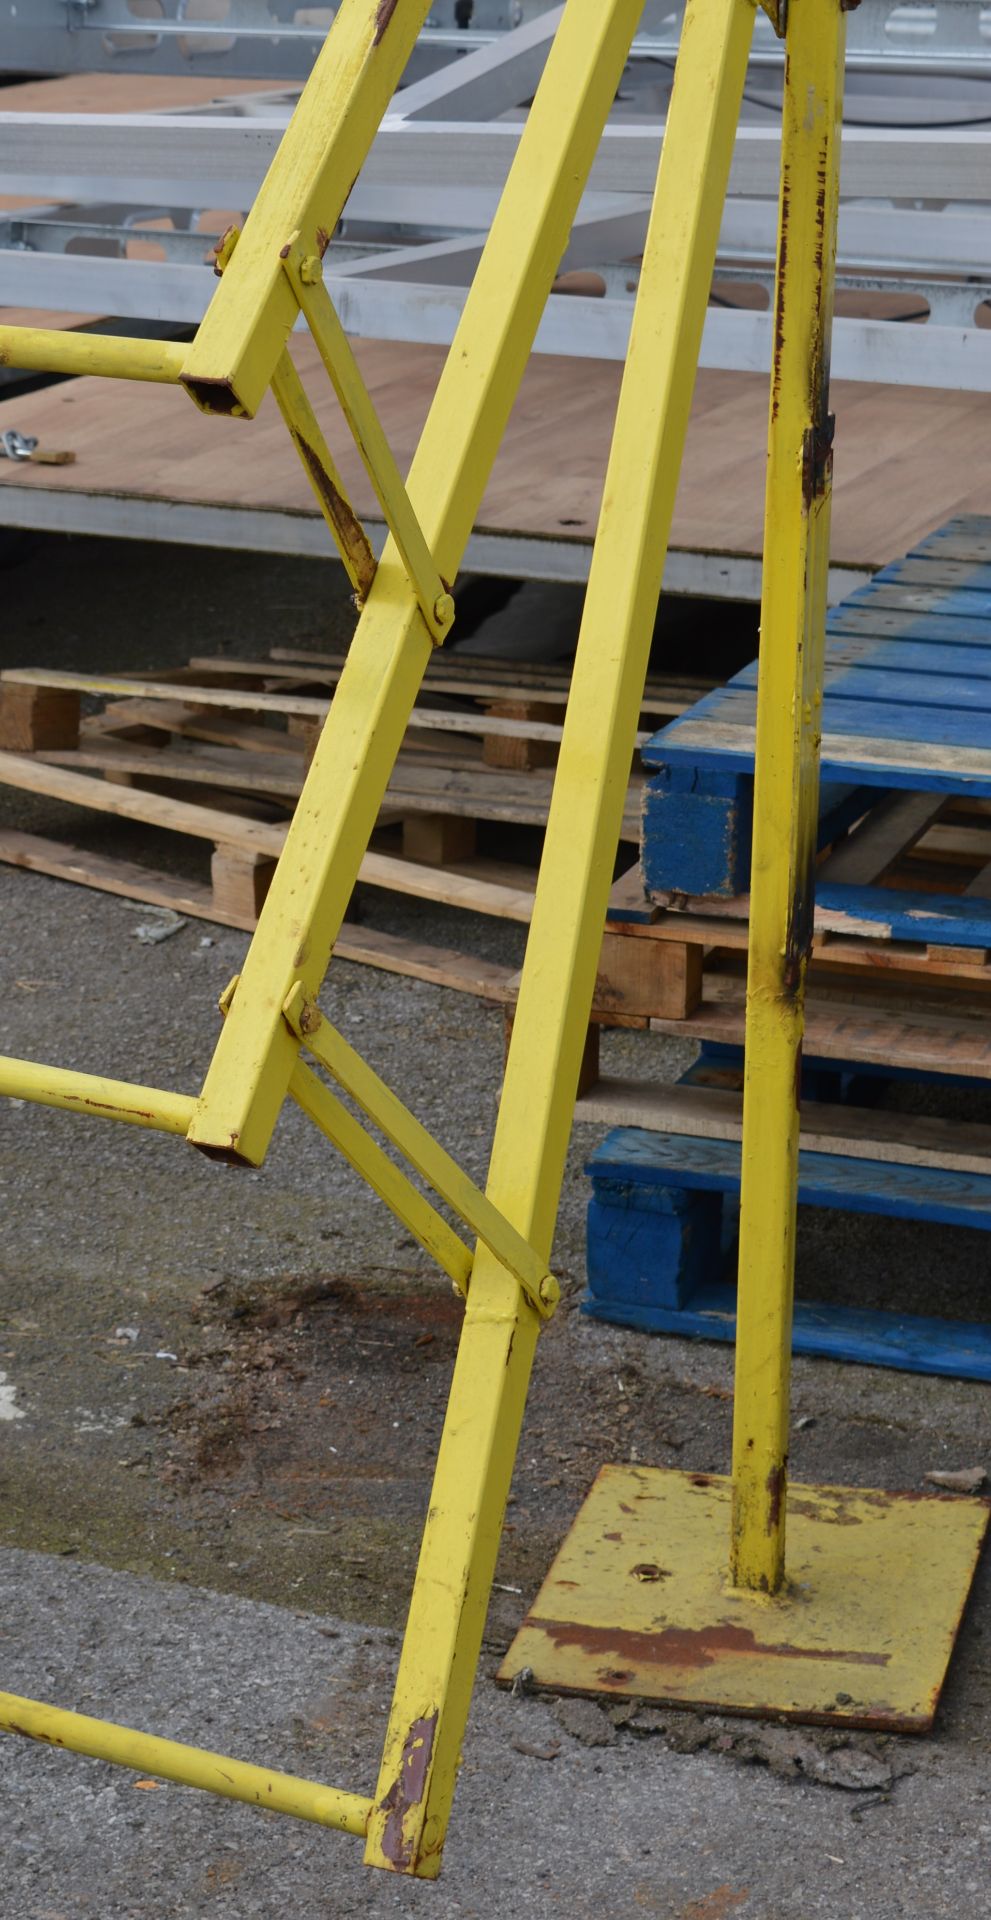 1 x Mezzanine Floor Pallet Gate - Must Have Item For Health & Safety - CL011 - Approx Width 180cms - Image 3 of 4